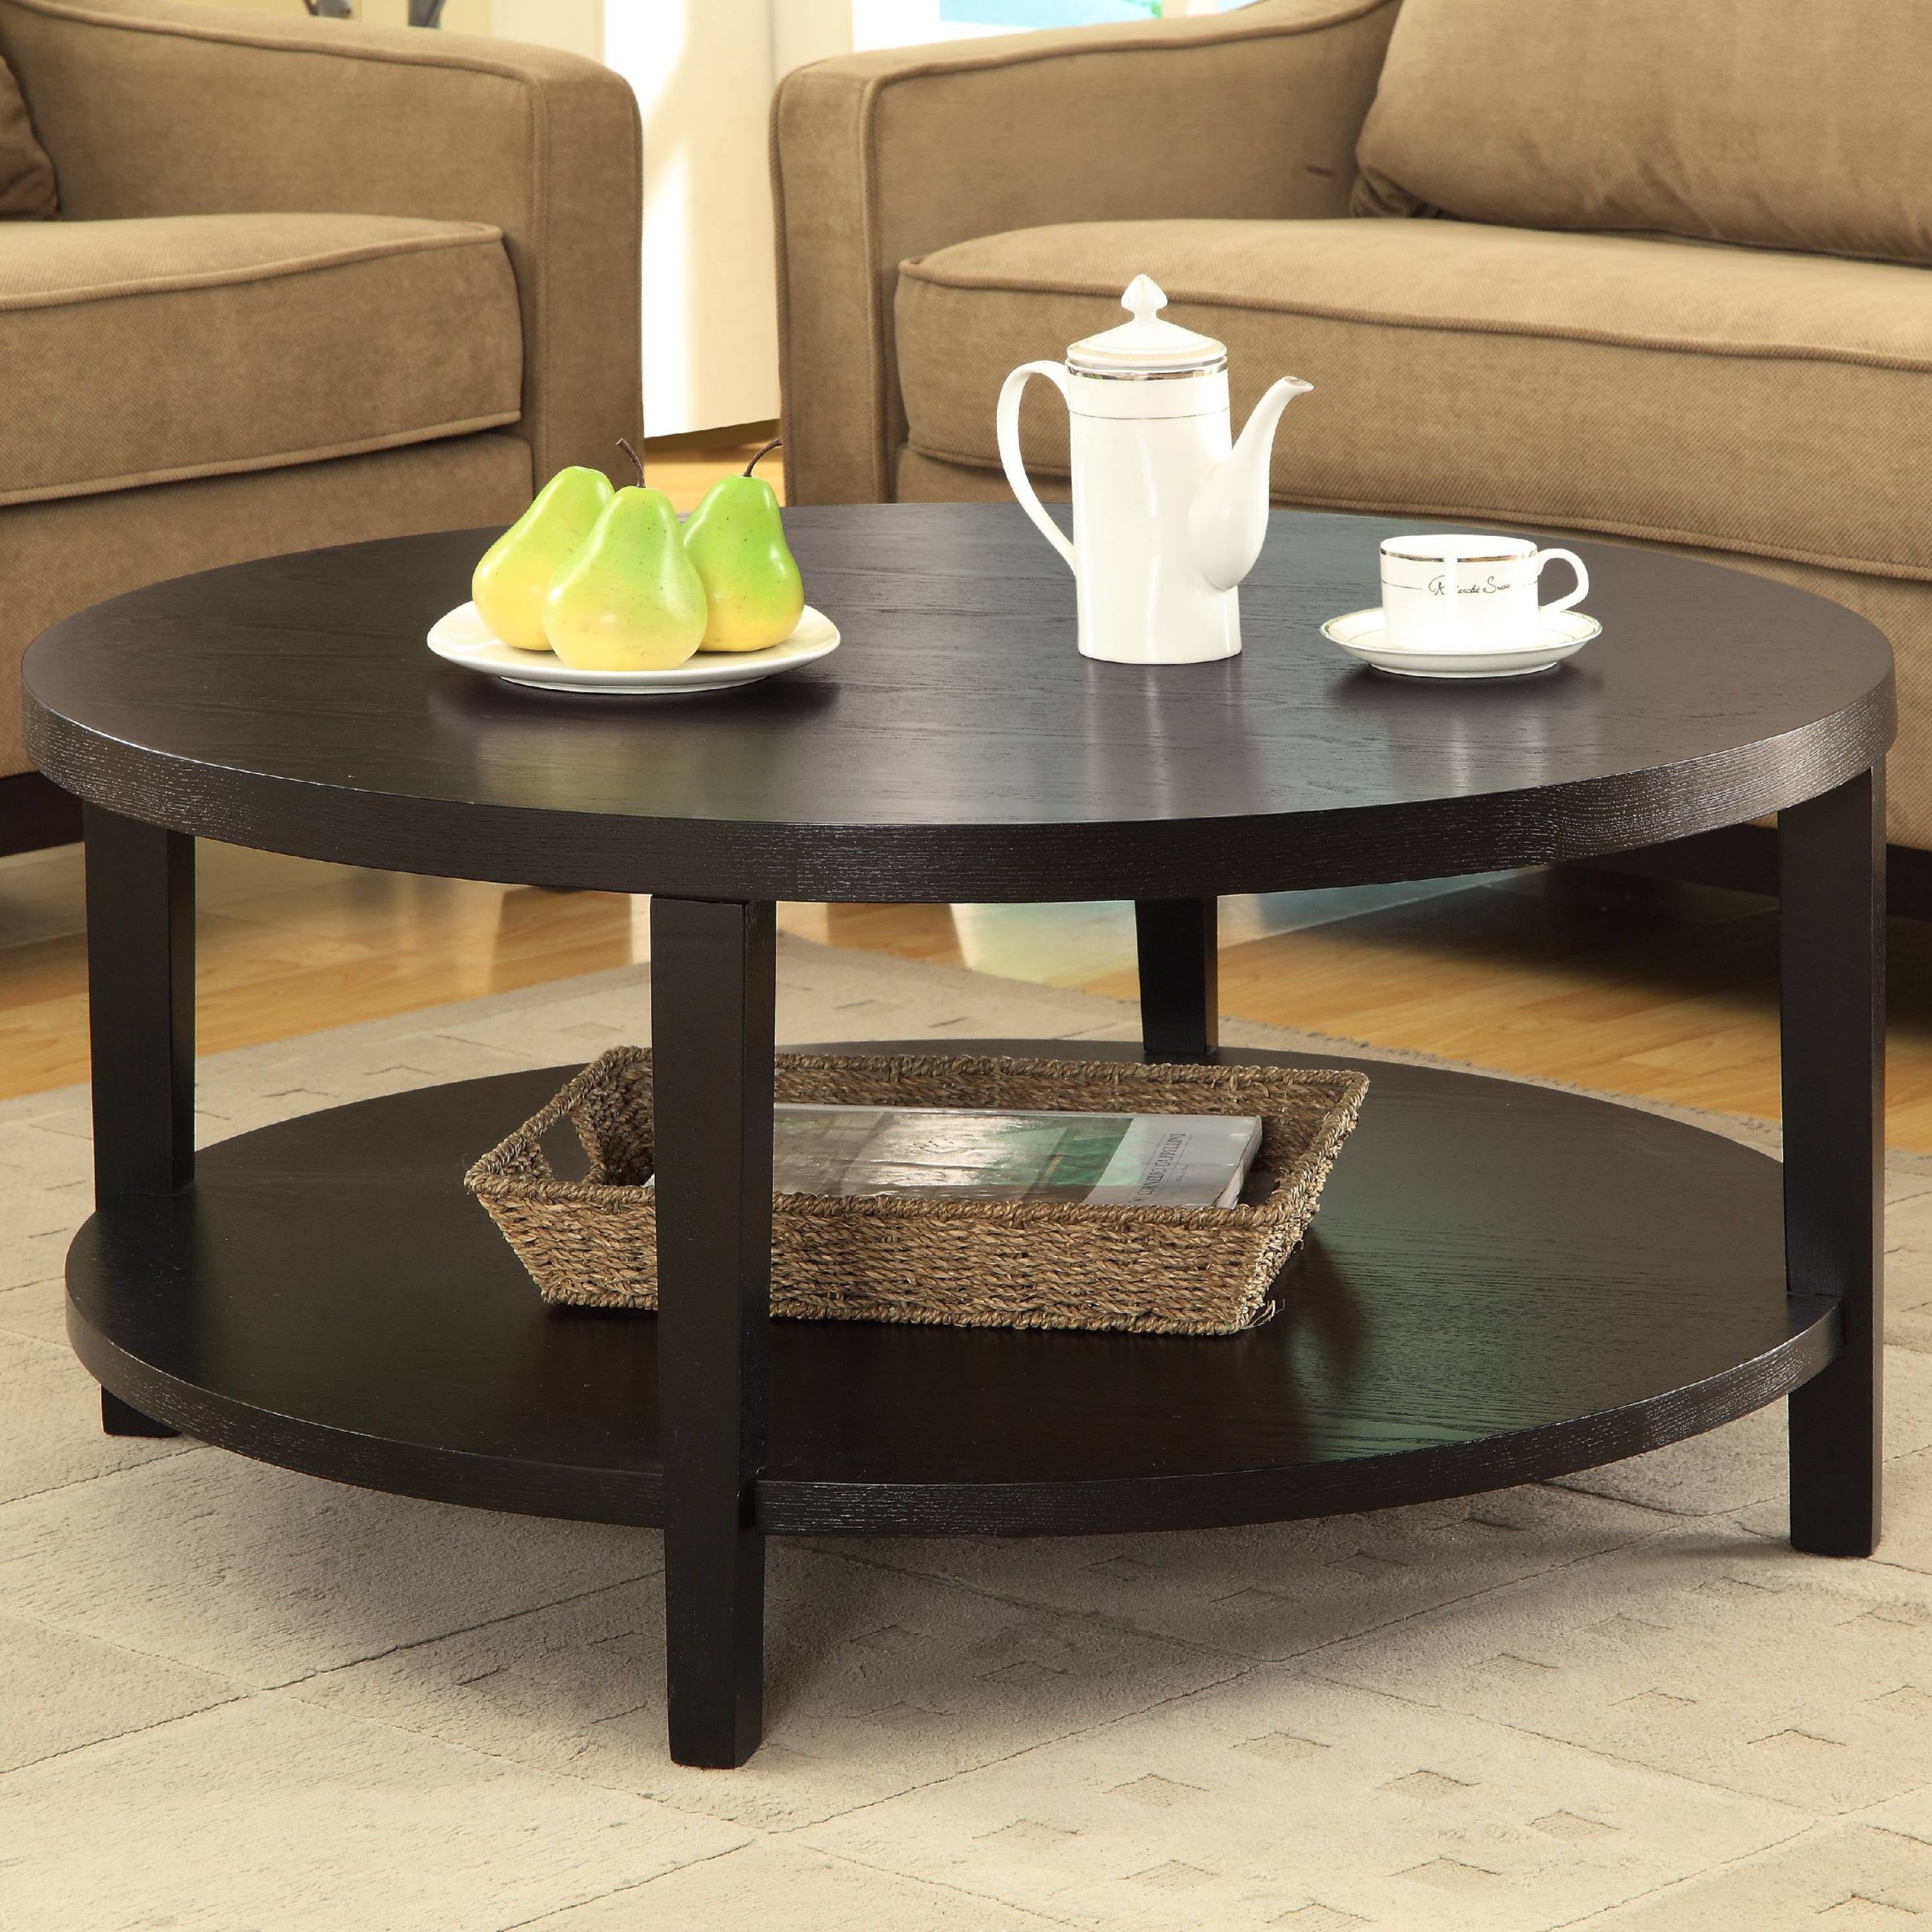 Espresso Round Coffee Table – Southern Enterprises Voyager Espresso Intended For Round Coffee Tables (View 15 of 15)